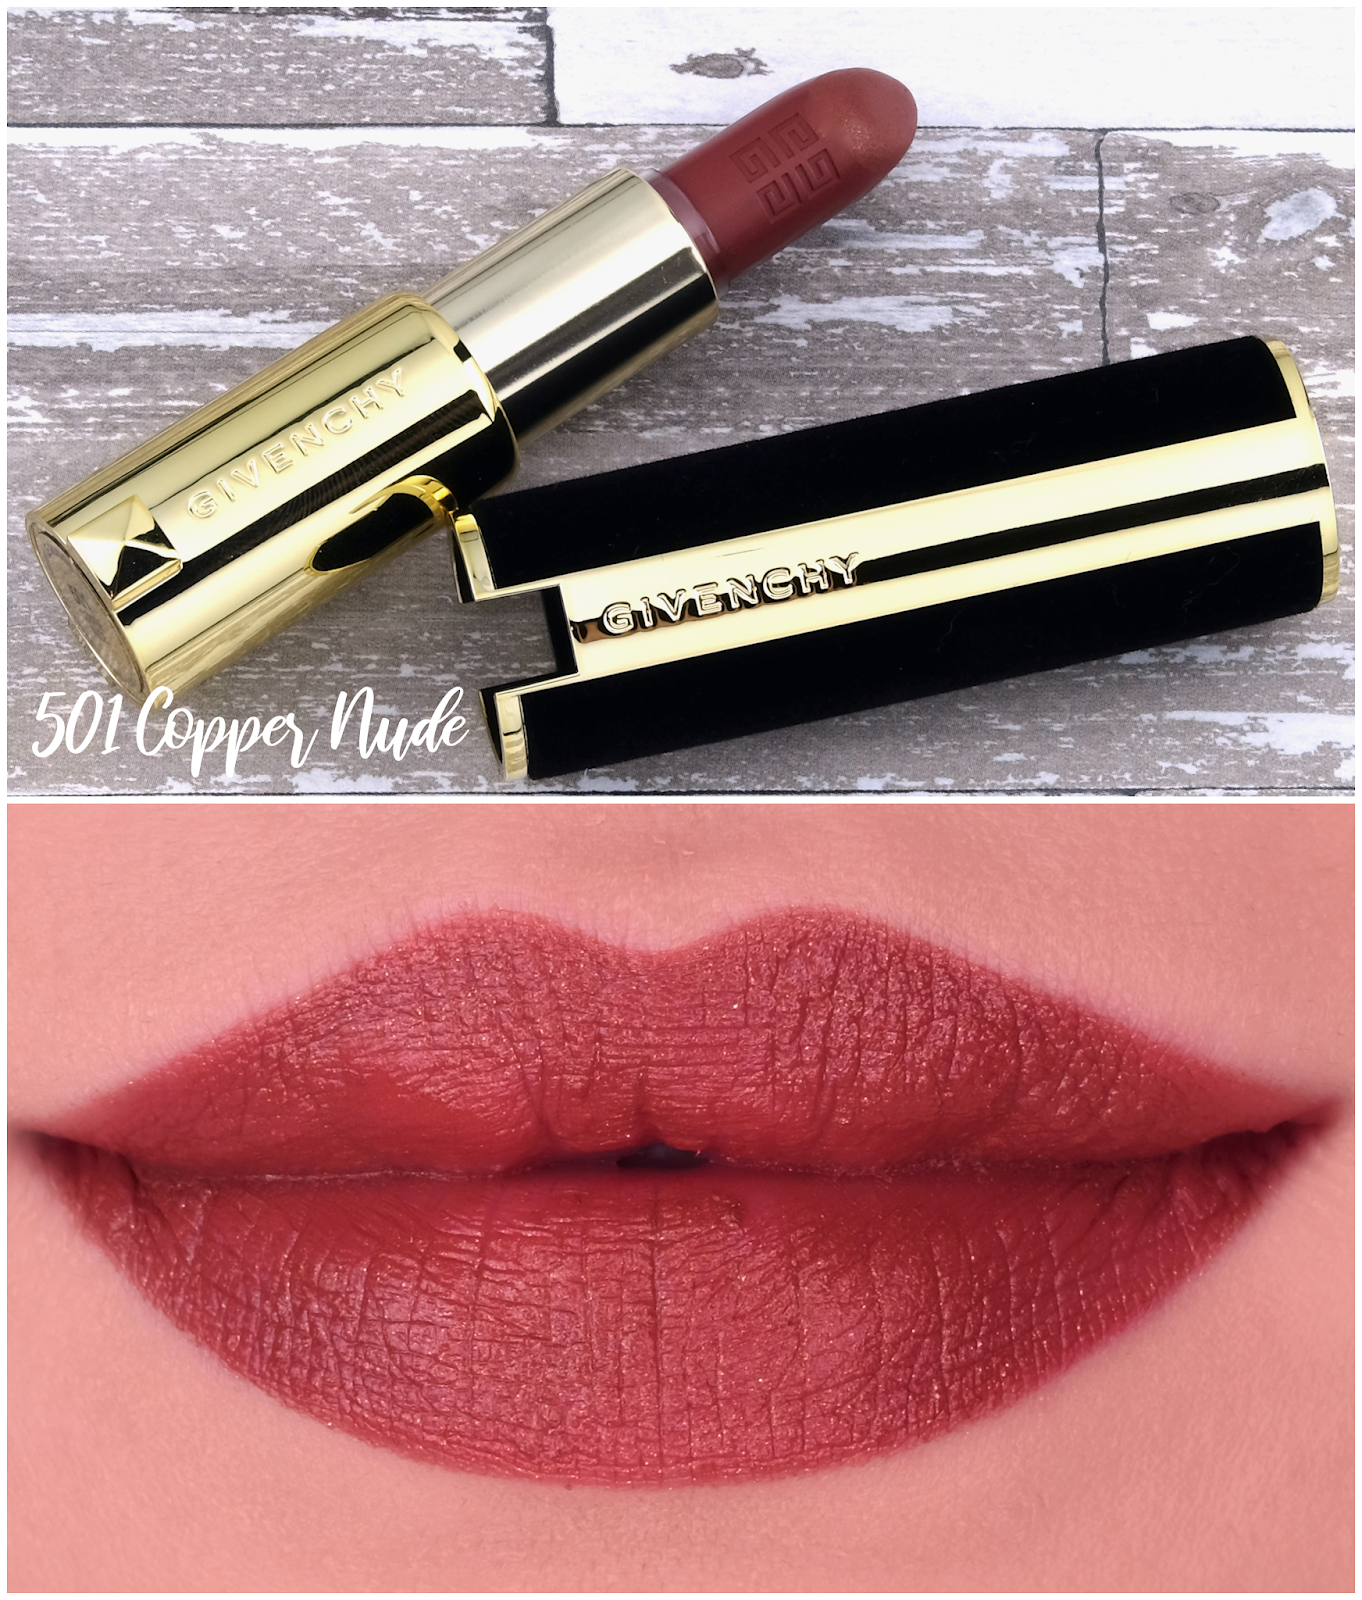 Givenchy | Holiday 2021 Le Rouge Lipstick in "501 Copper Nude": Review and Swatches